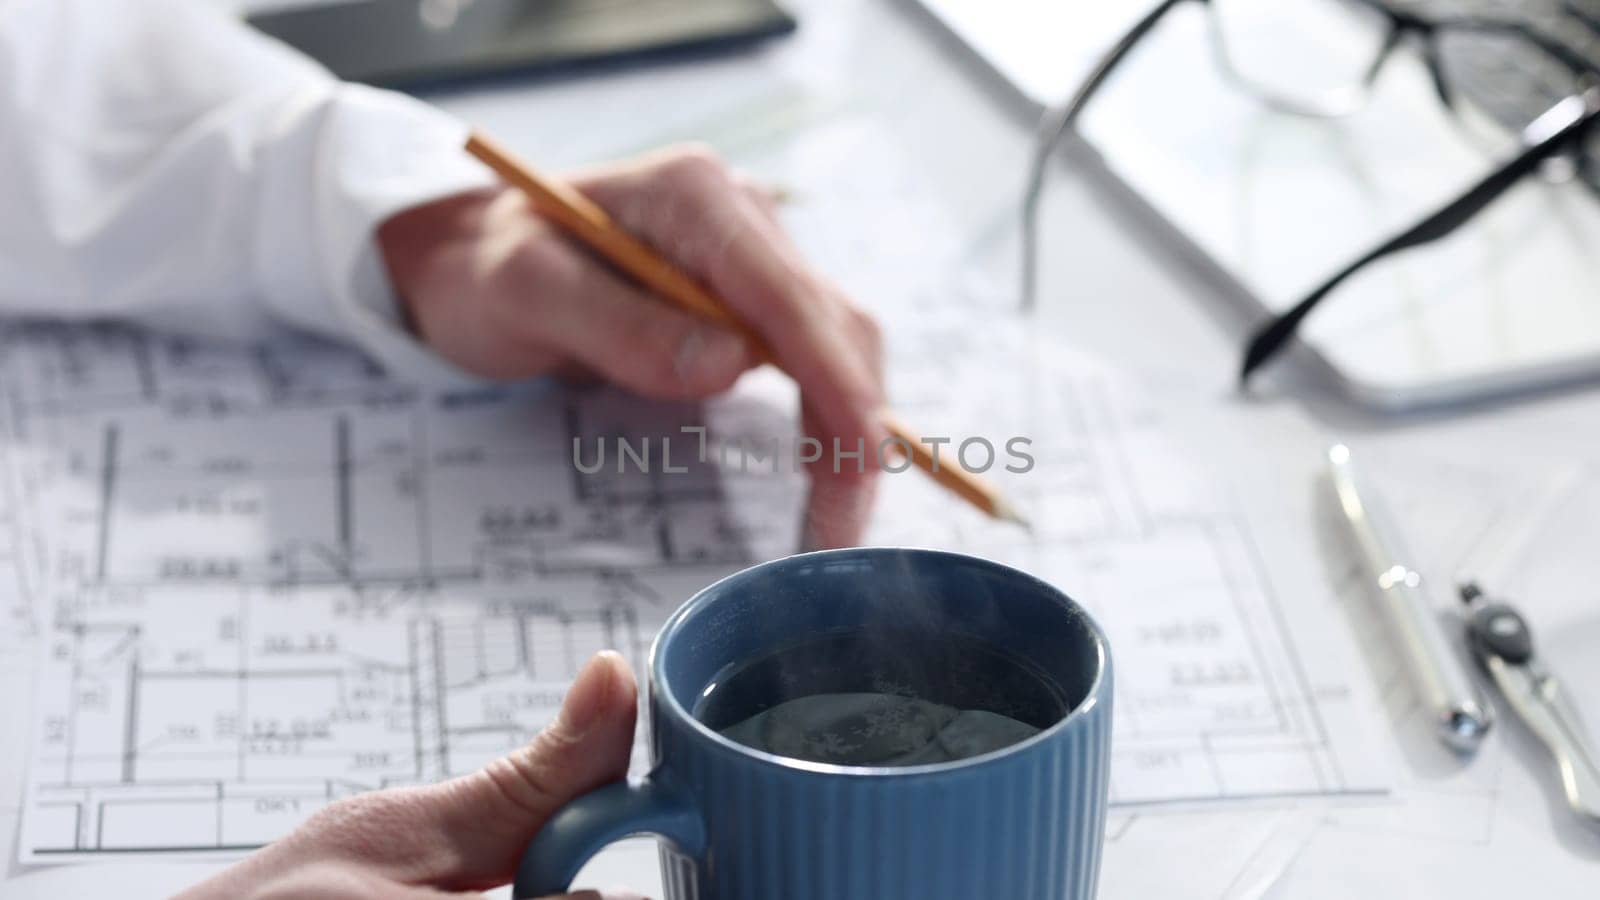 Drawing drawings and house layout with a cup of coffee.